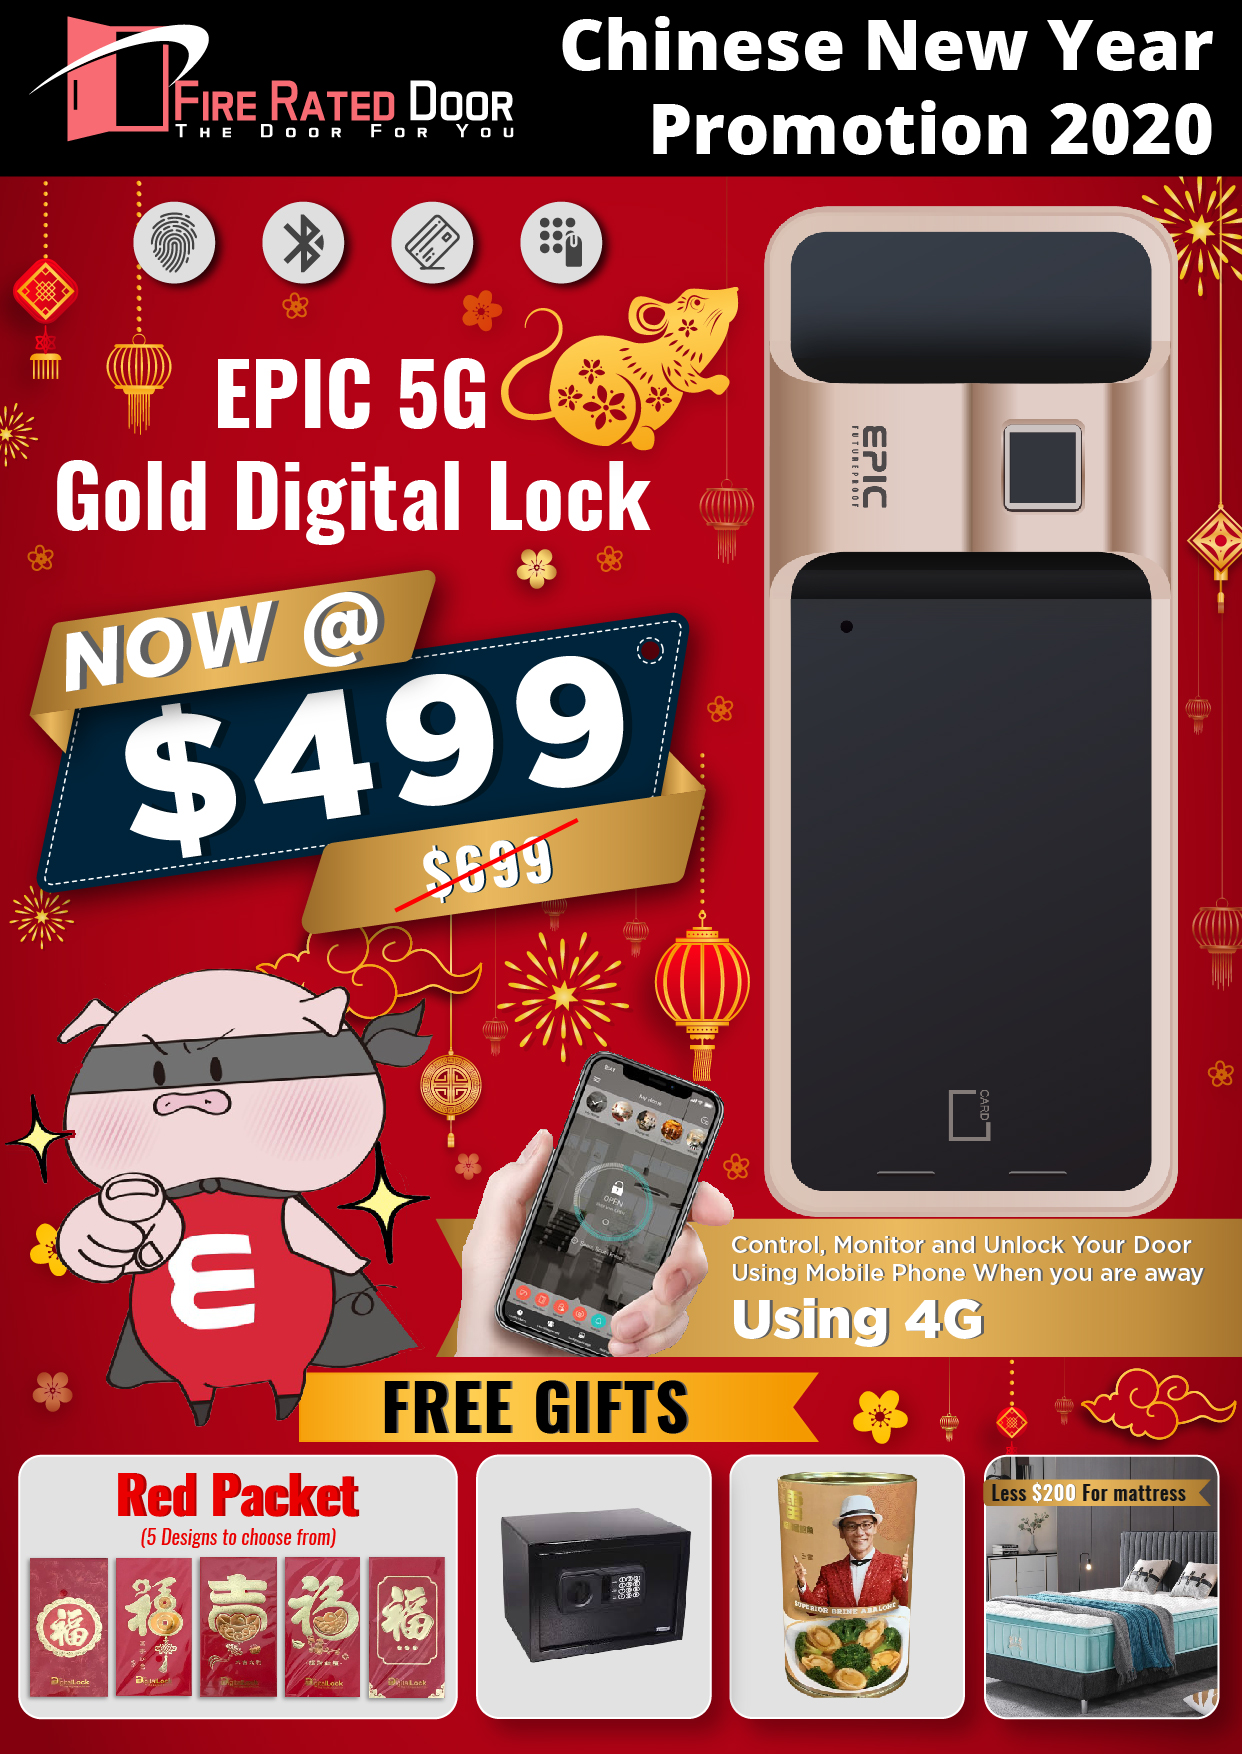 CHINESE NEW YEAR OFFERS FROM LEADING FIRE RATED DOOR SELLER IN SINGAPORE, GET EPIC 5G GOLD DIGITAL